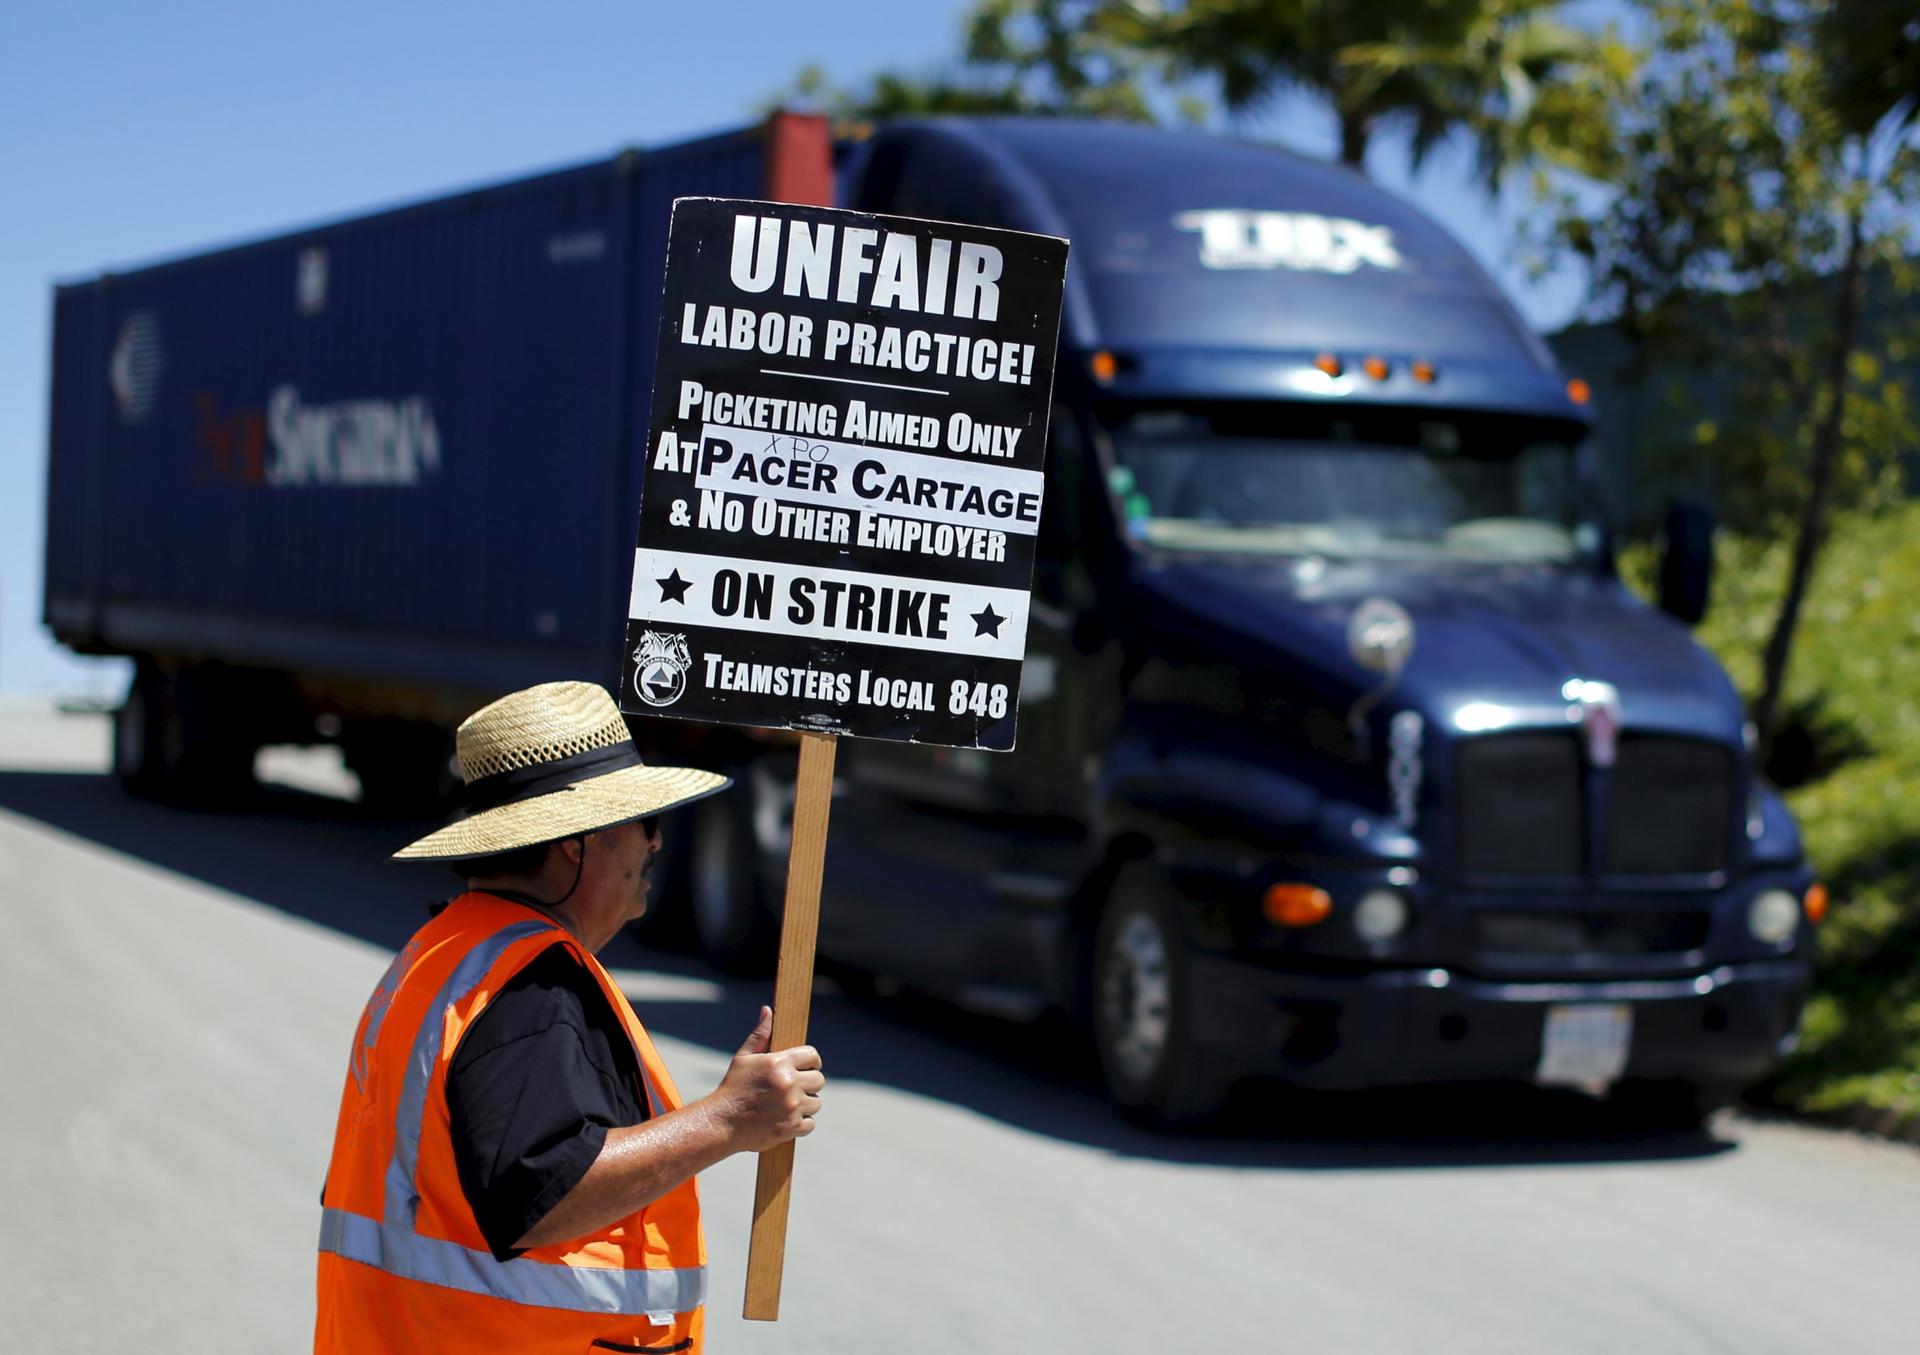 A man next to a truck stands in an orange vest with a sign that says "unfair labor practice."